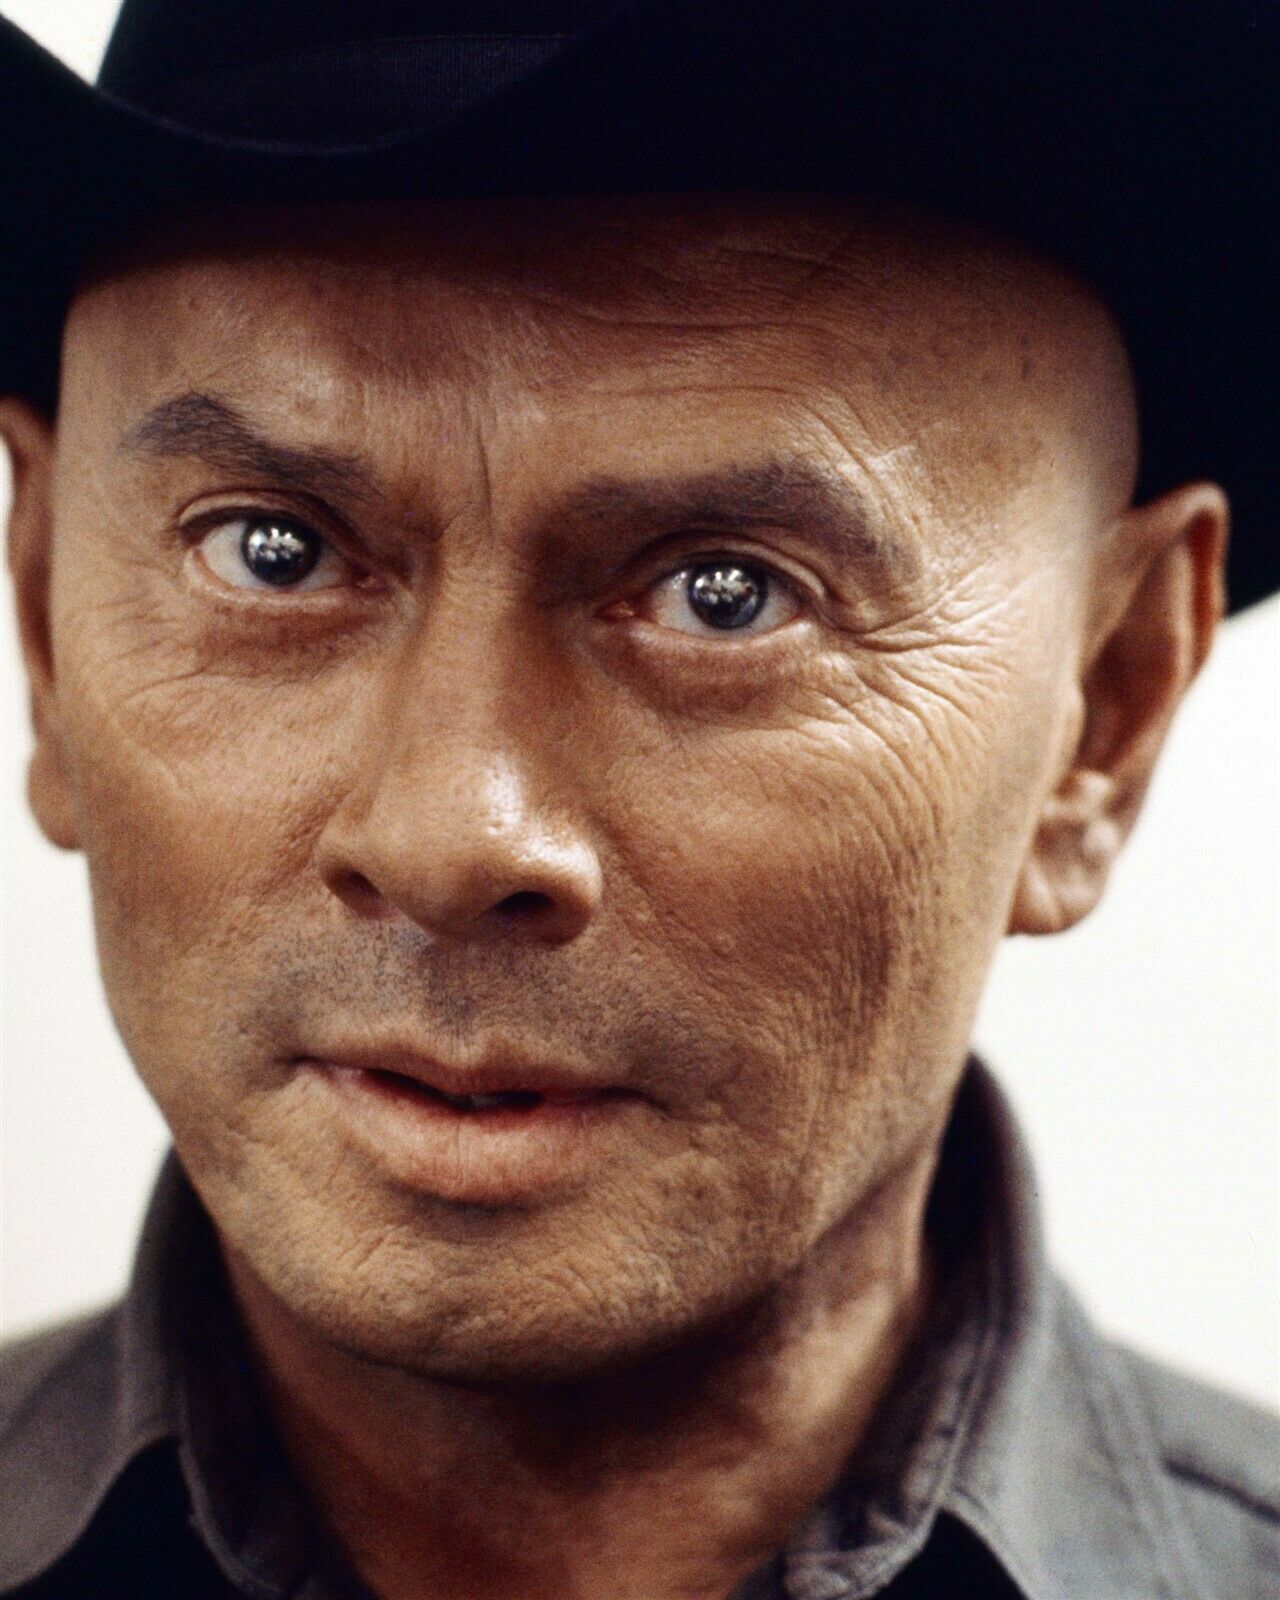 Yul Brynner with wild robotic stare as The Gunslinger 1973 Westworld 11x14 photo